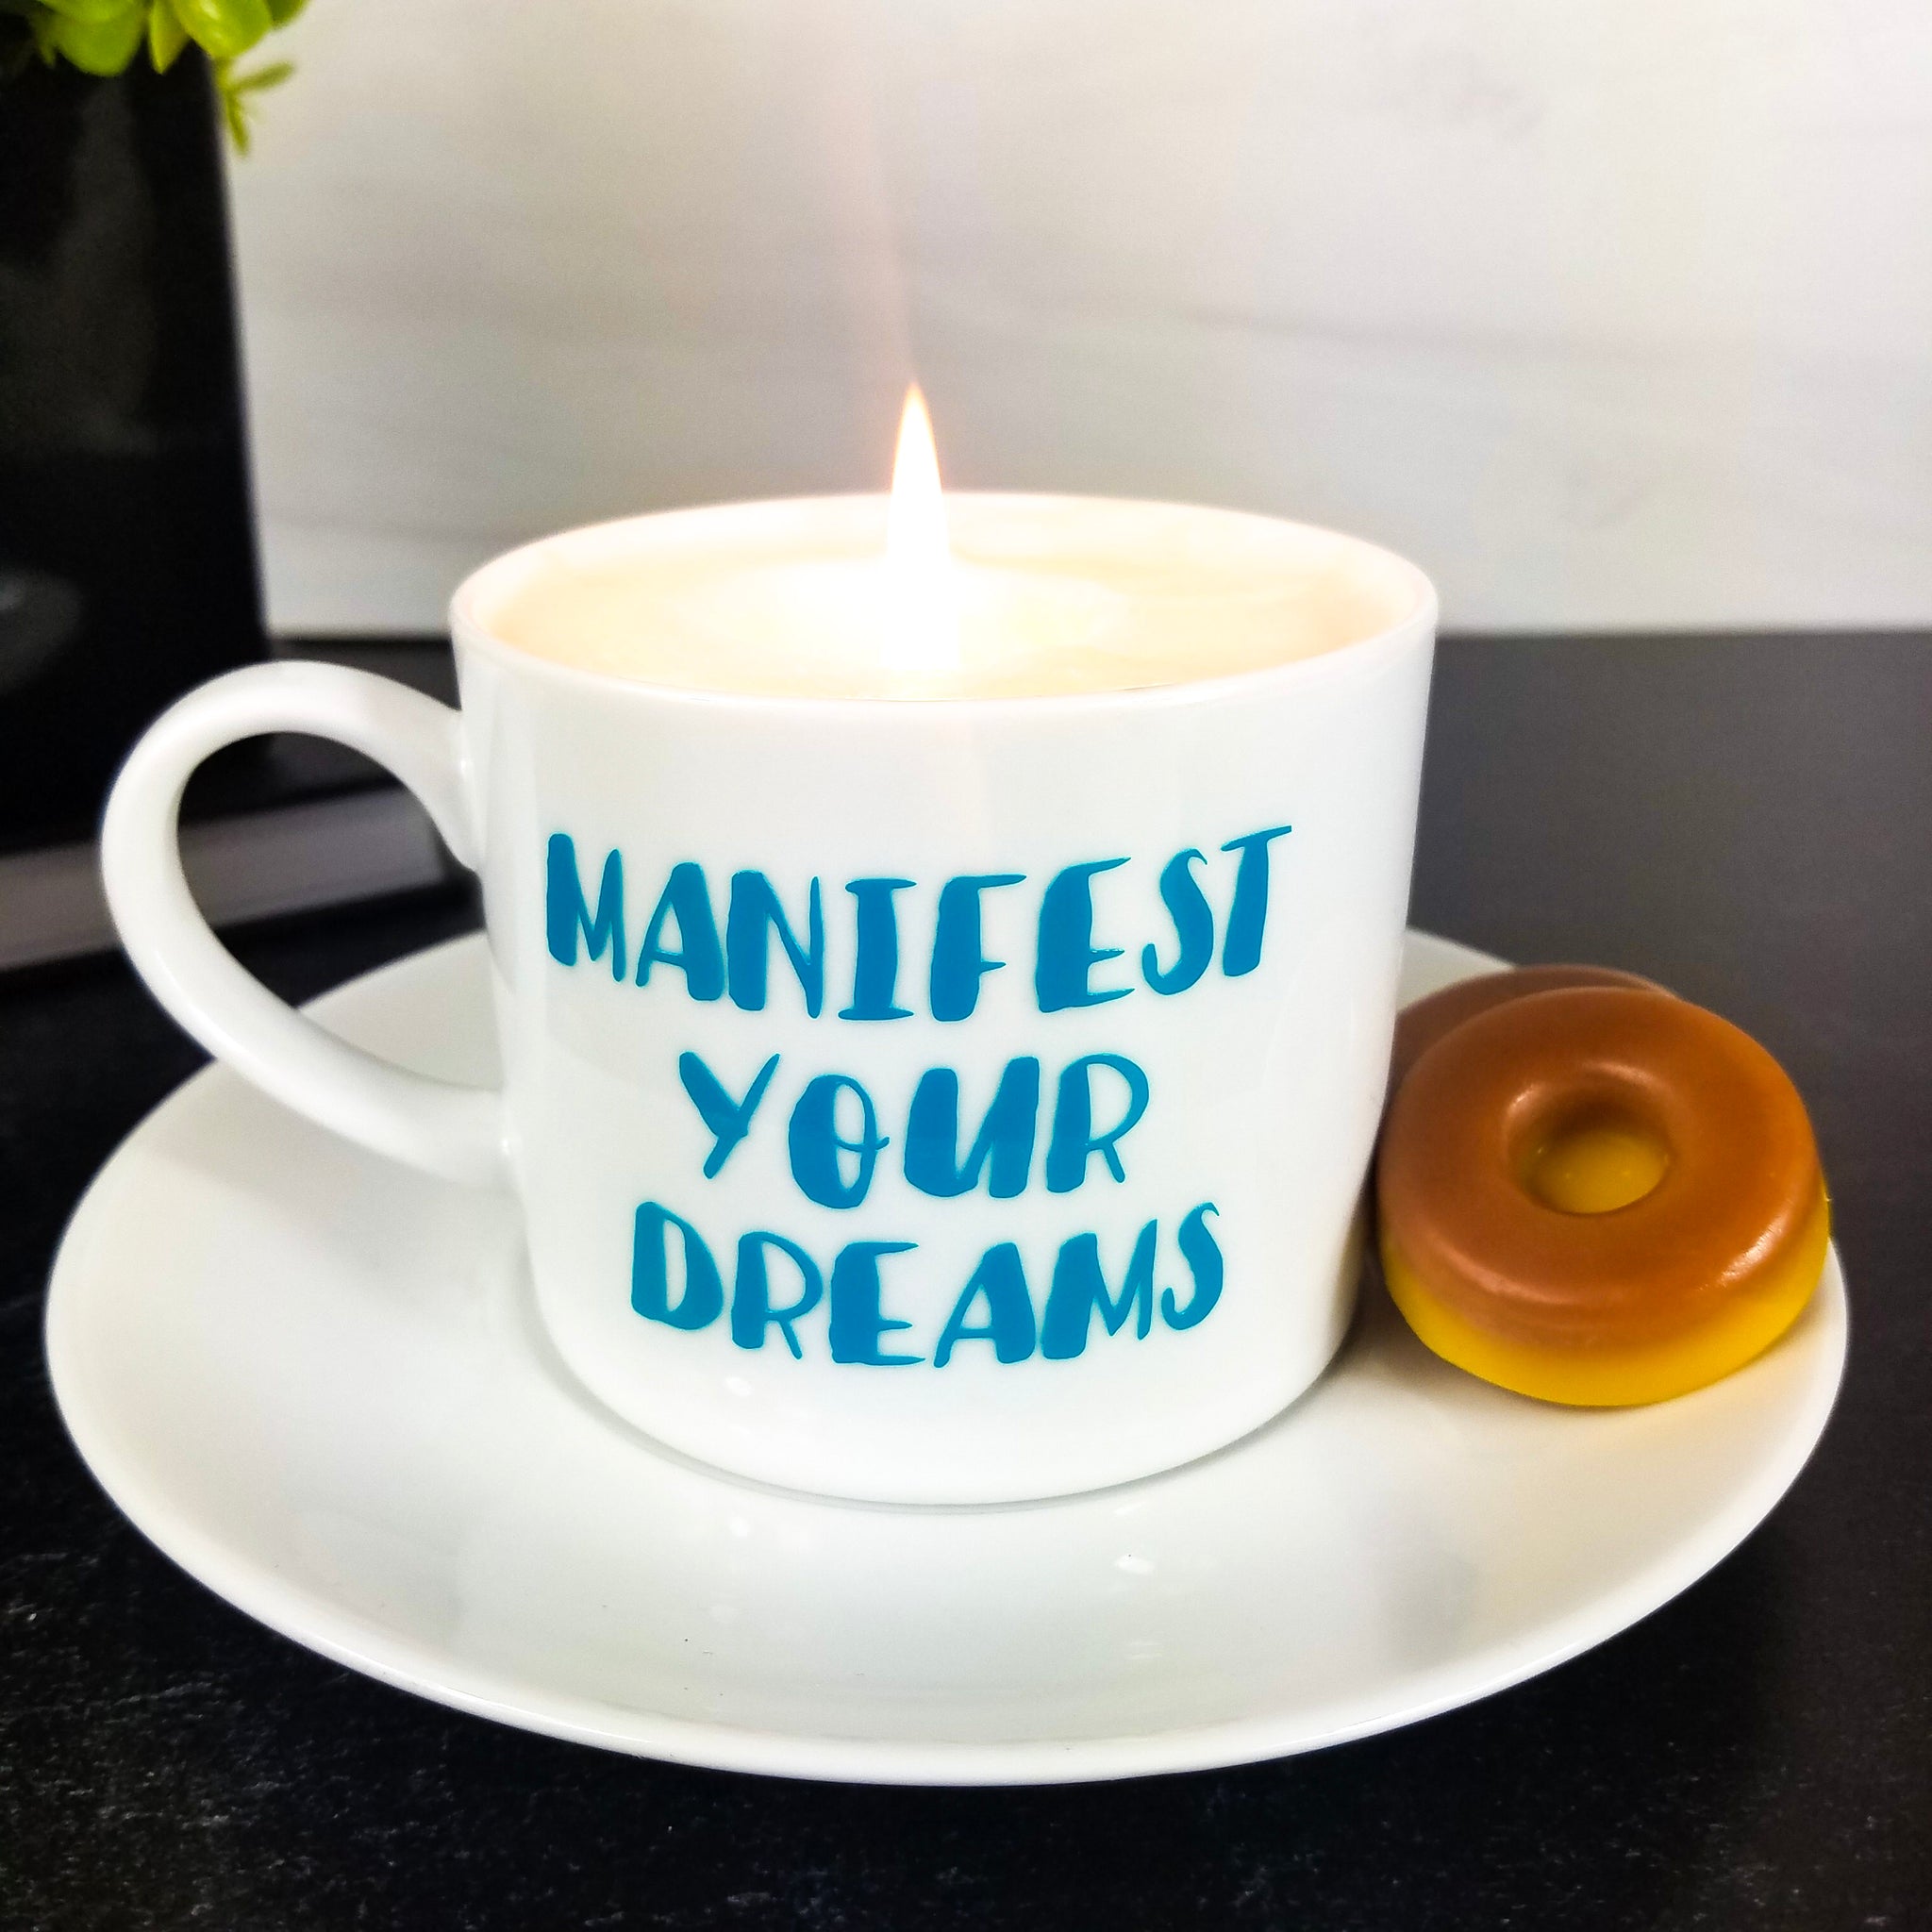 Manifest-Your-Dreams-Aqua-Coffee-Cup-Candle-doughnuts-wax-melts